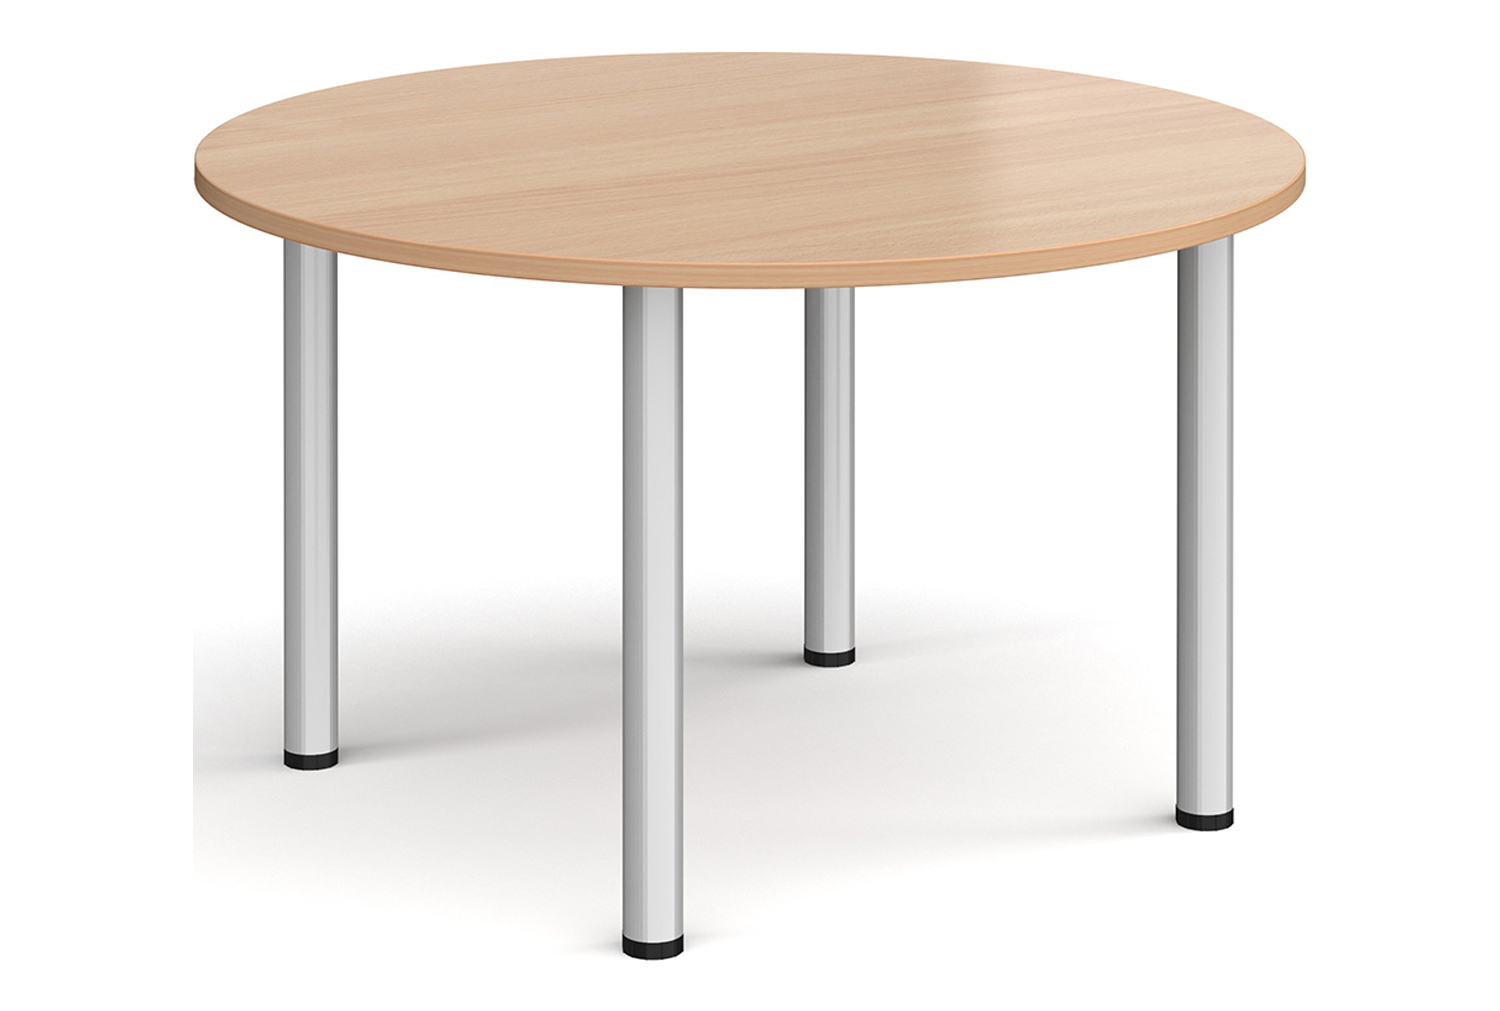 Bowers Round Meeting Table, 120diax73h (cm), Beech, Fully Installed